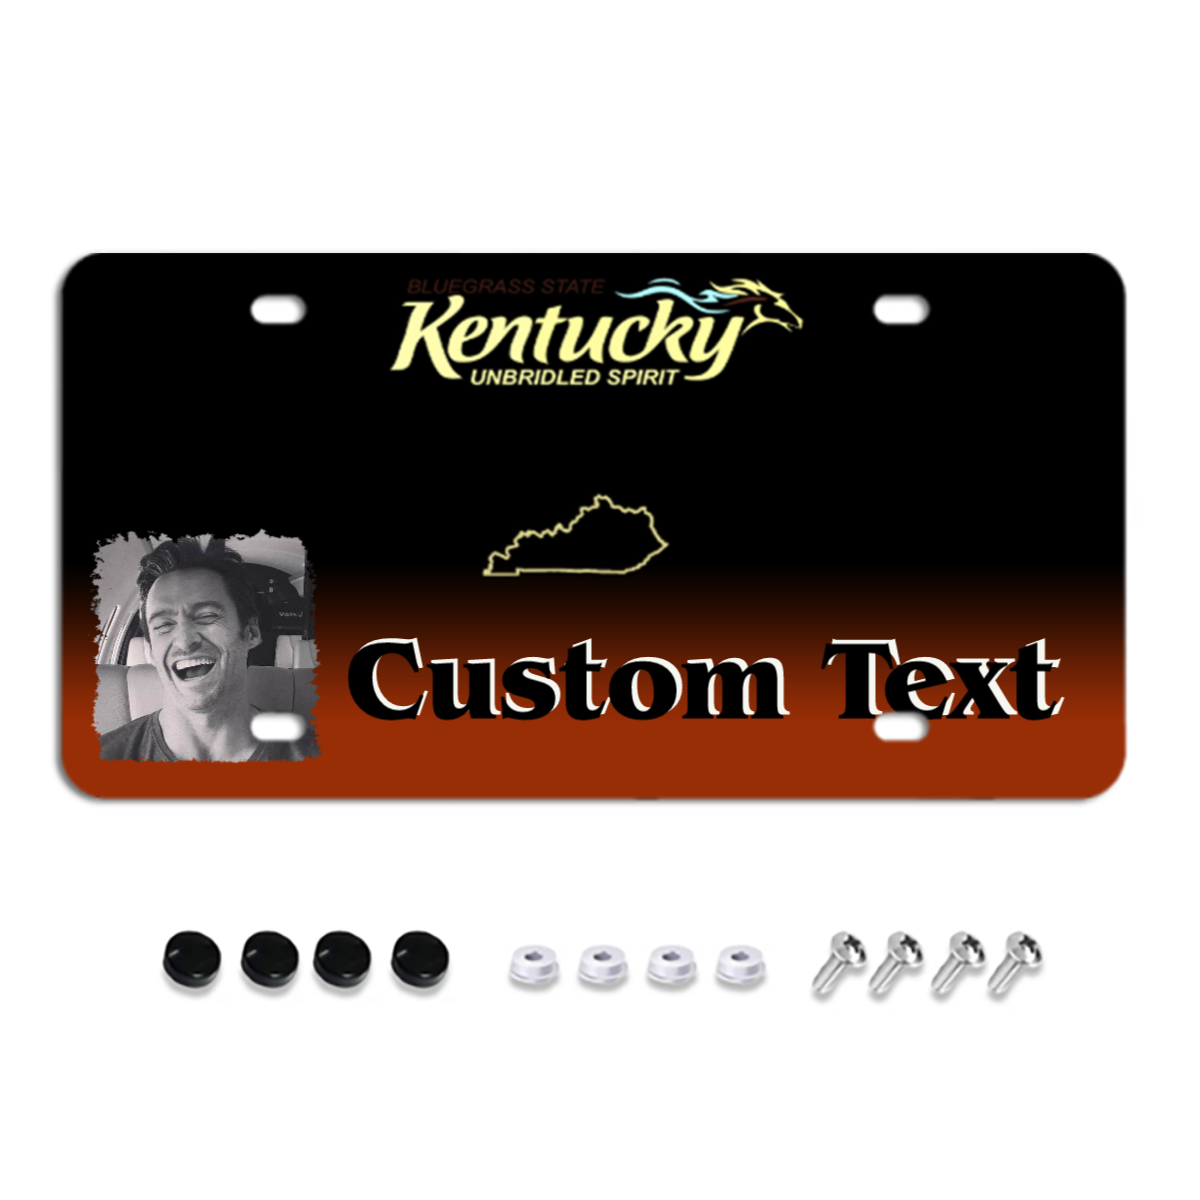 current kentucky license plates